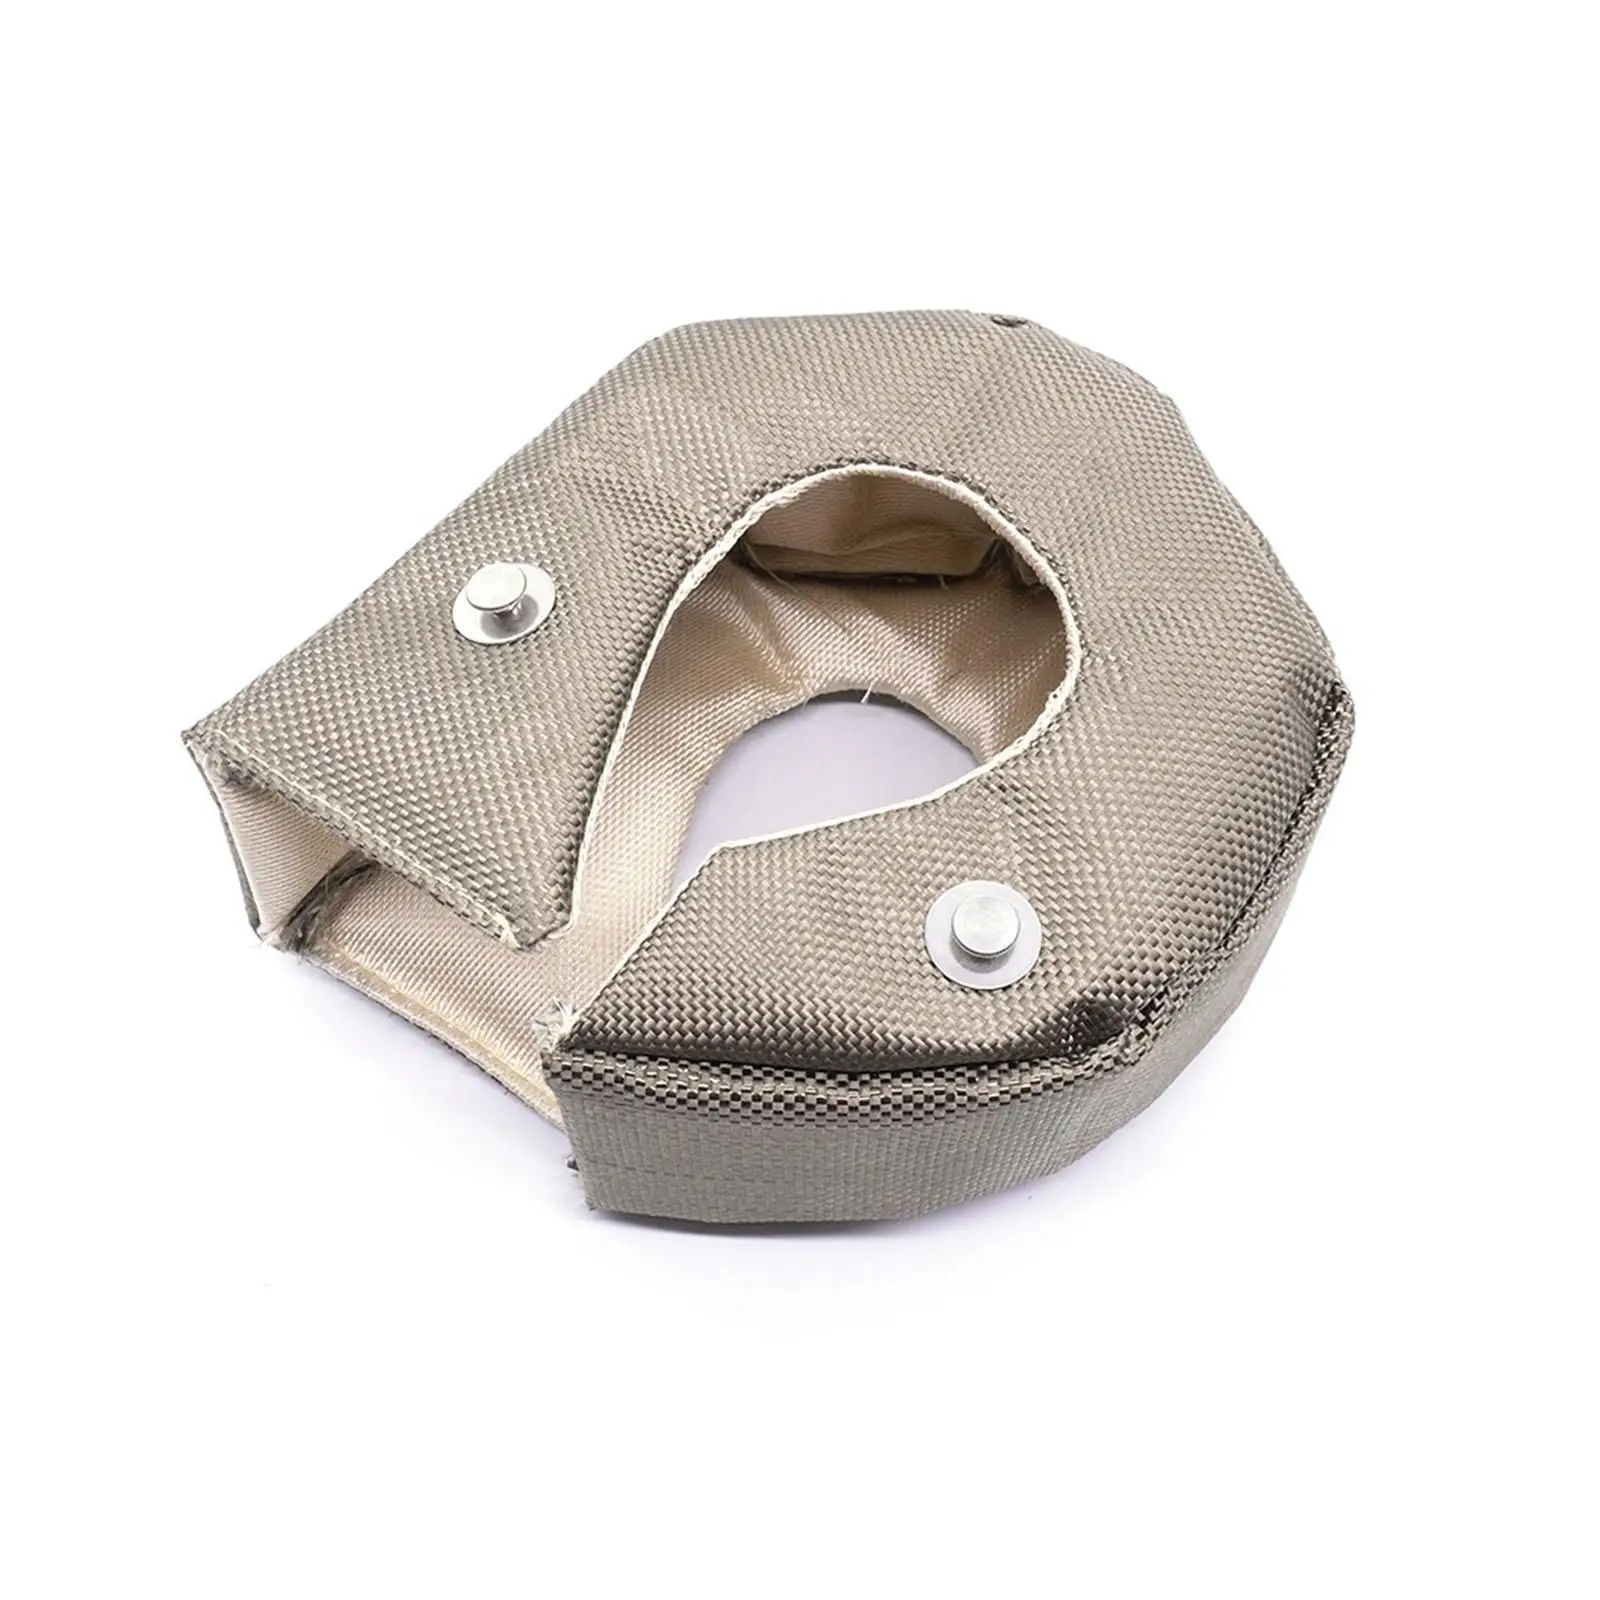 Turbocharger Heat Shield Cover Auto Accessory Easy to Install